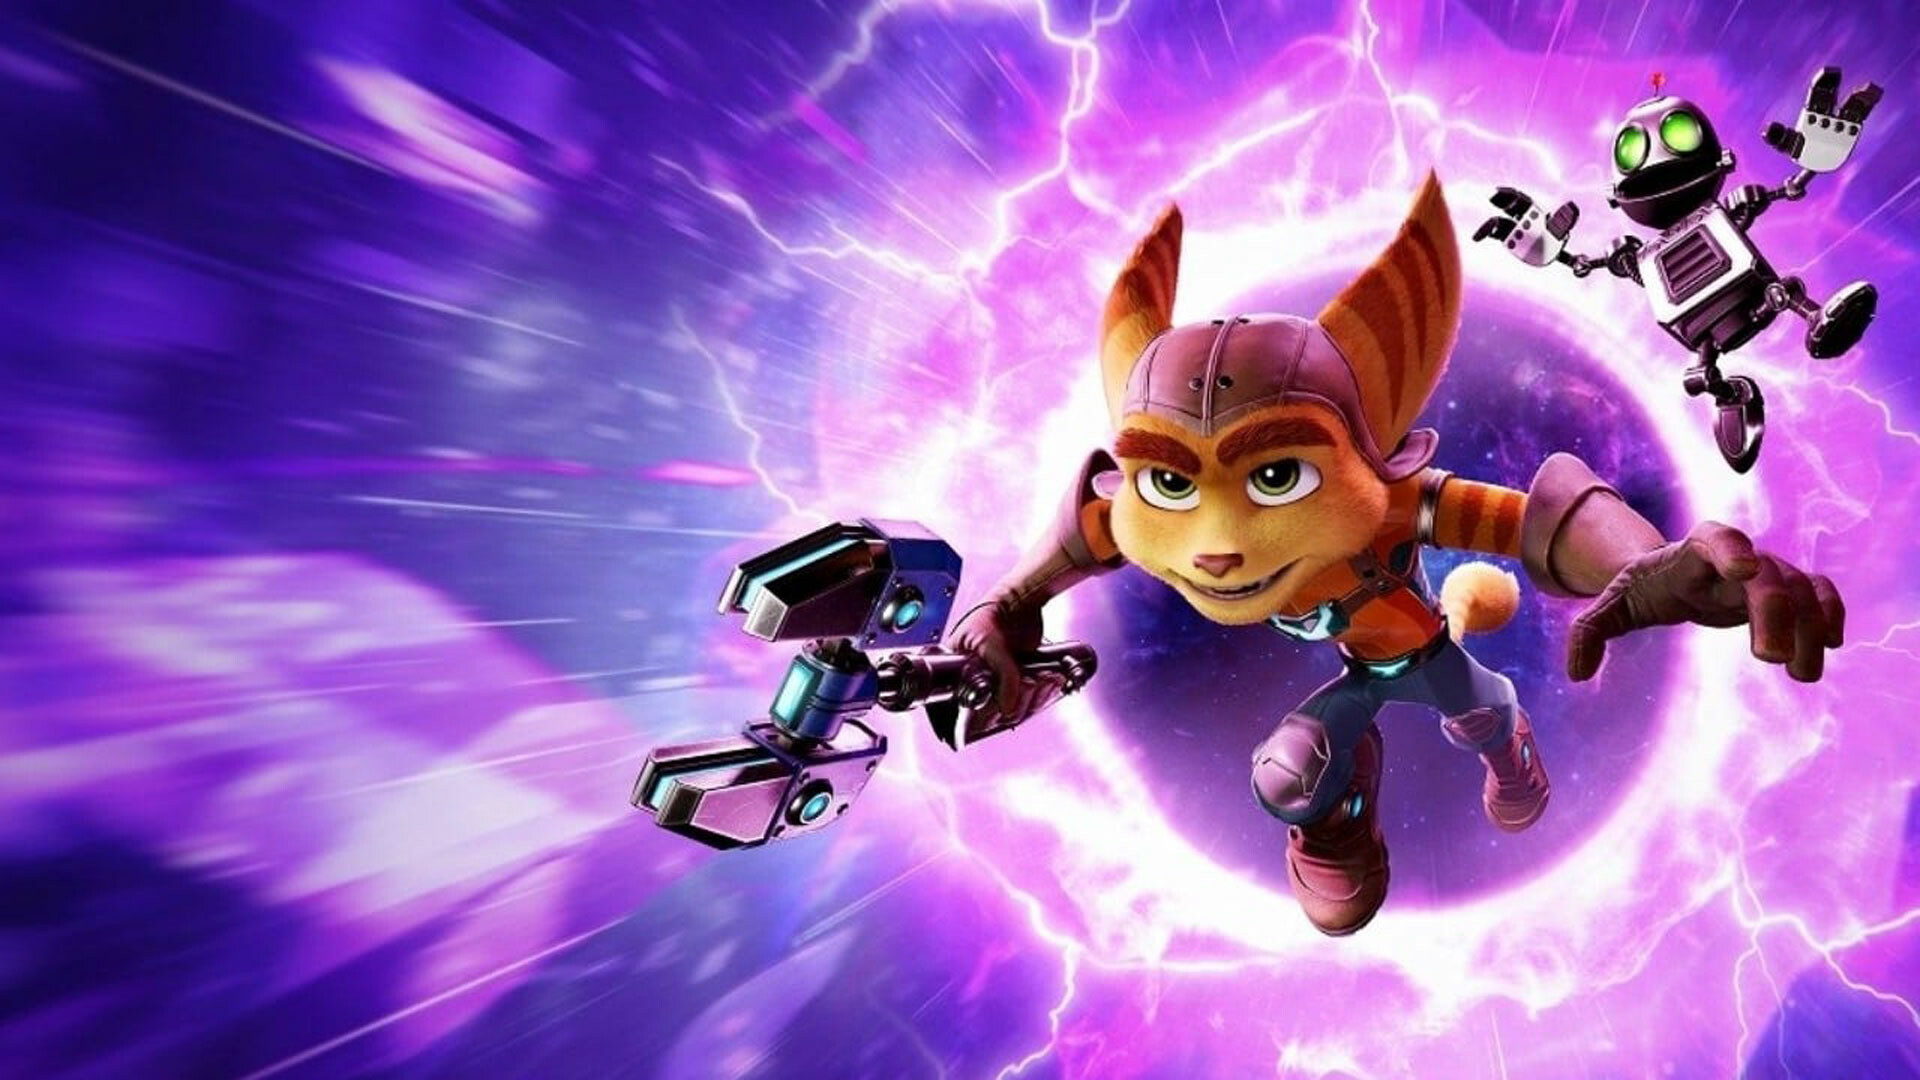 Ratchet and Clank: Rift Apart: An action game in which players assume the role of a fox-like character. 1920x1080 Full HD Background.